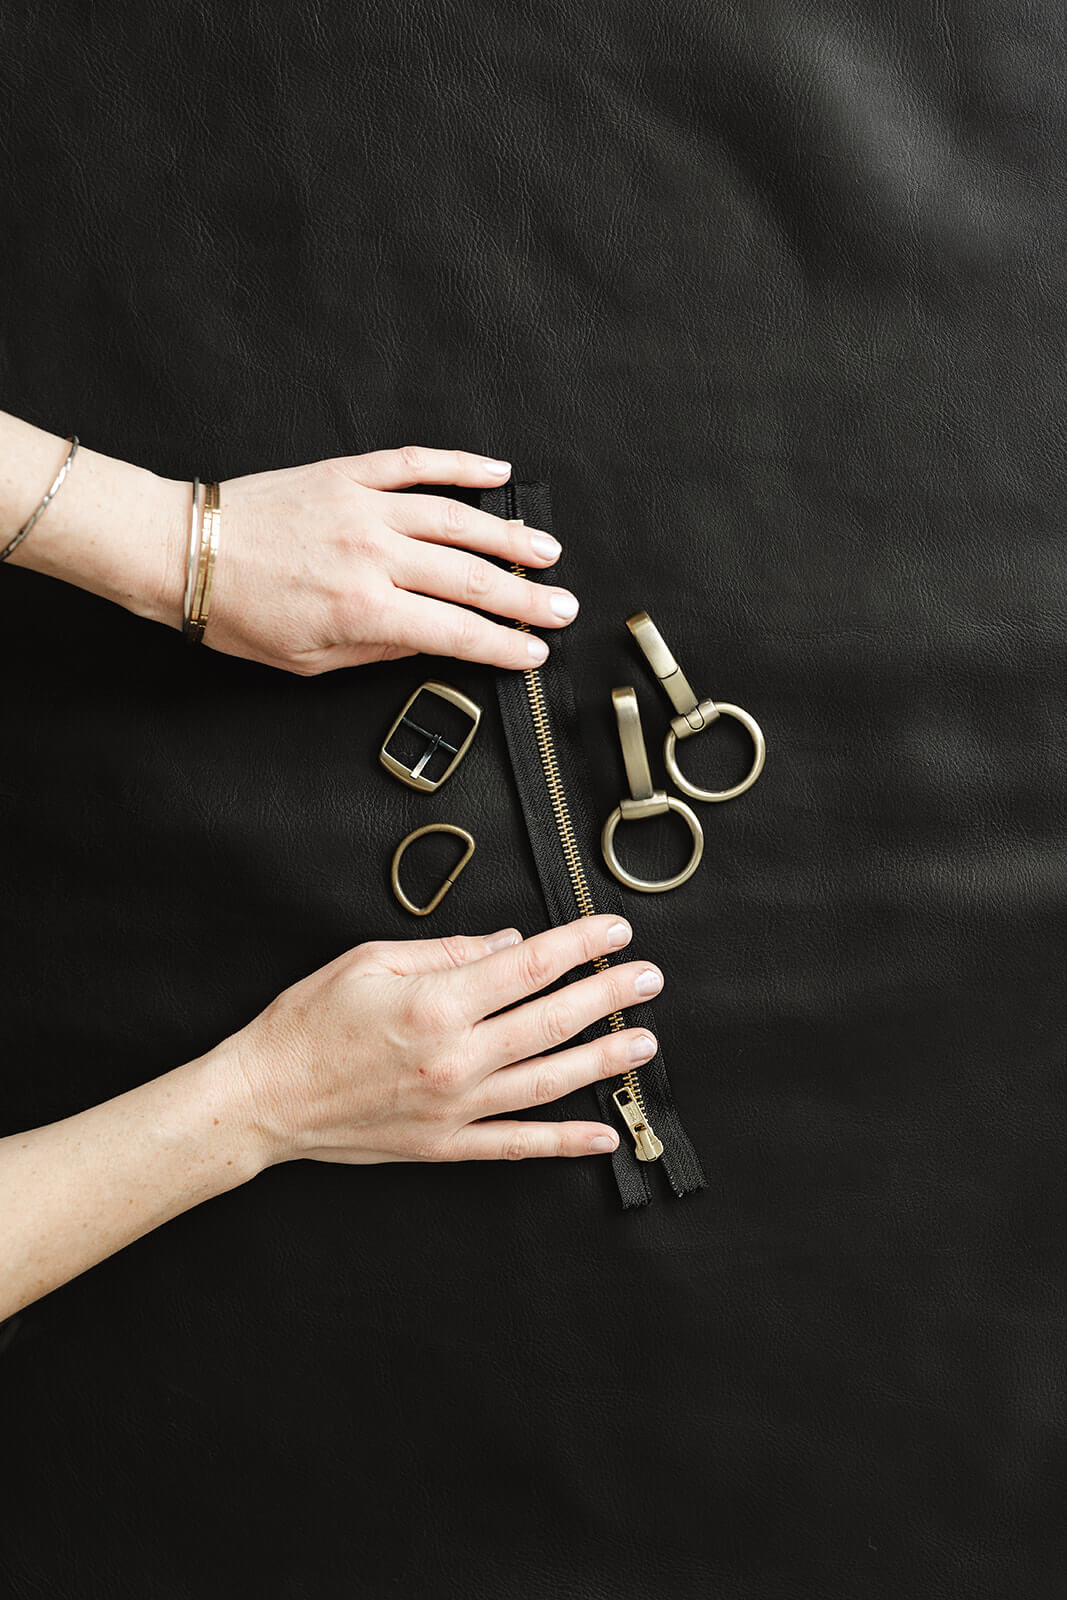 Hands on black leather showing black and gold ykk zip and antique hardware for Ella Jackson brand